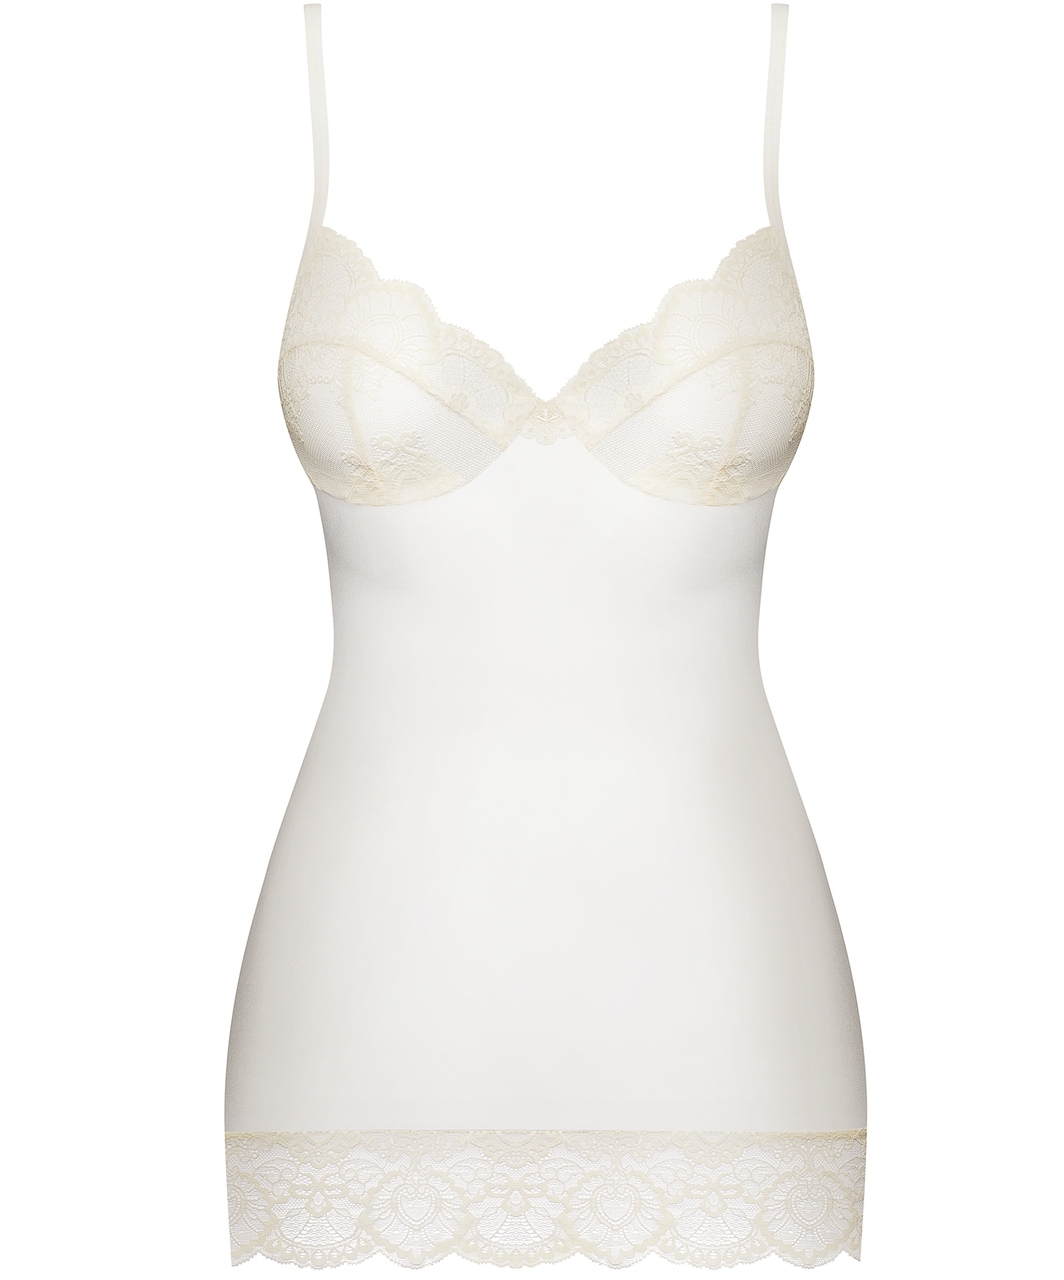 Obsessive white chemise with beige lace